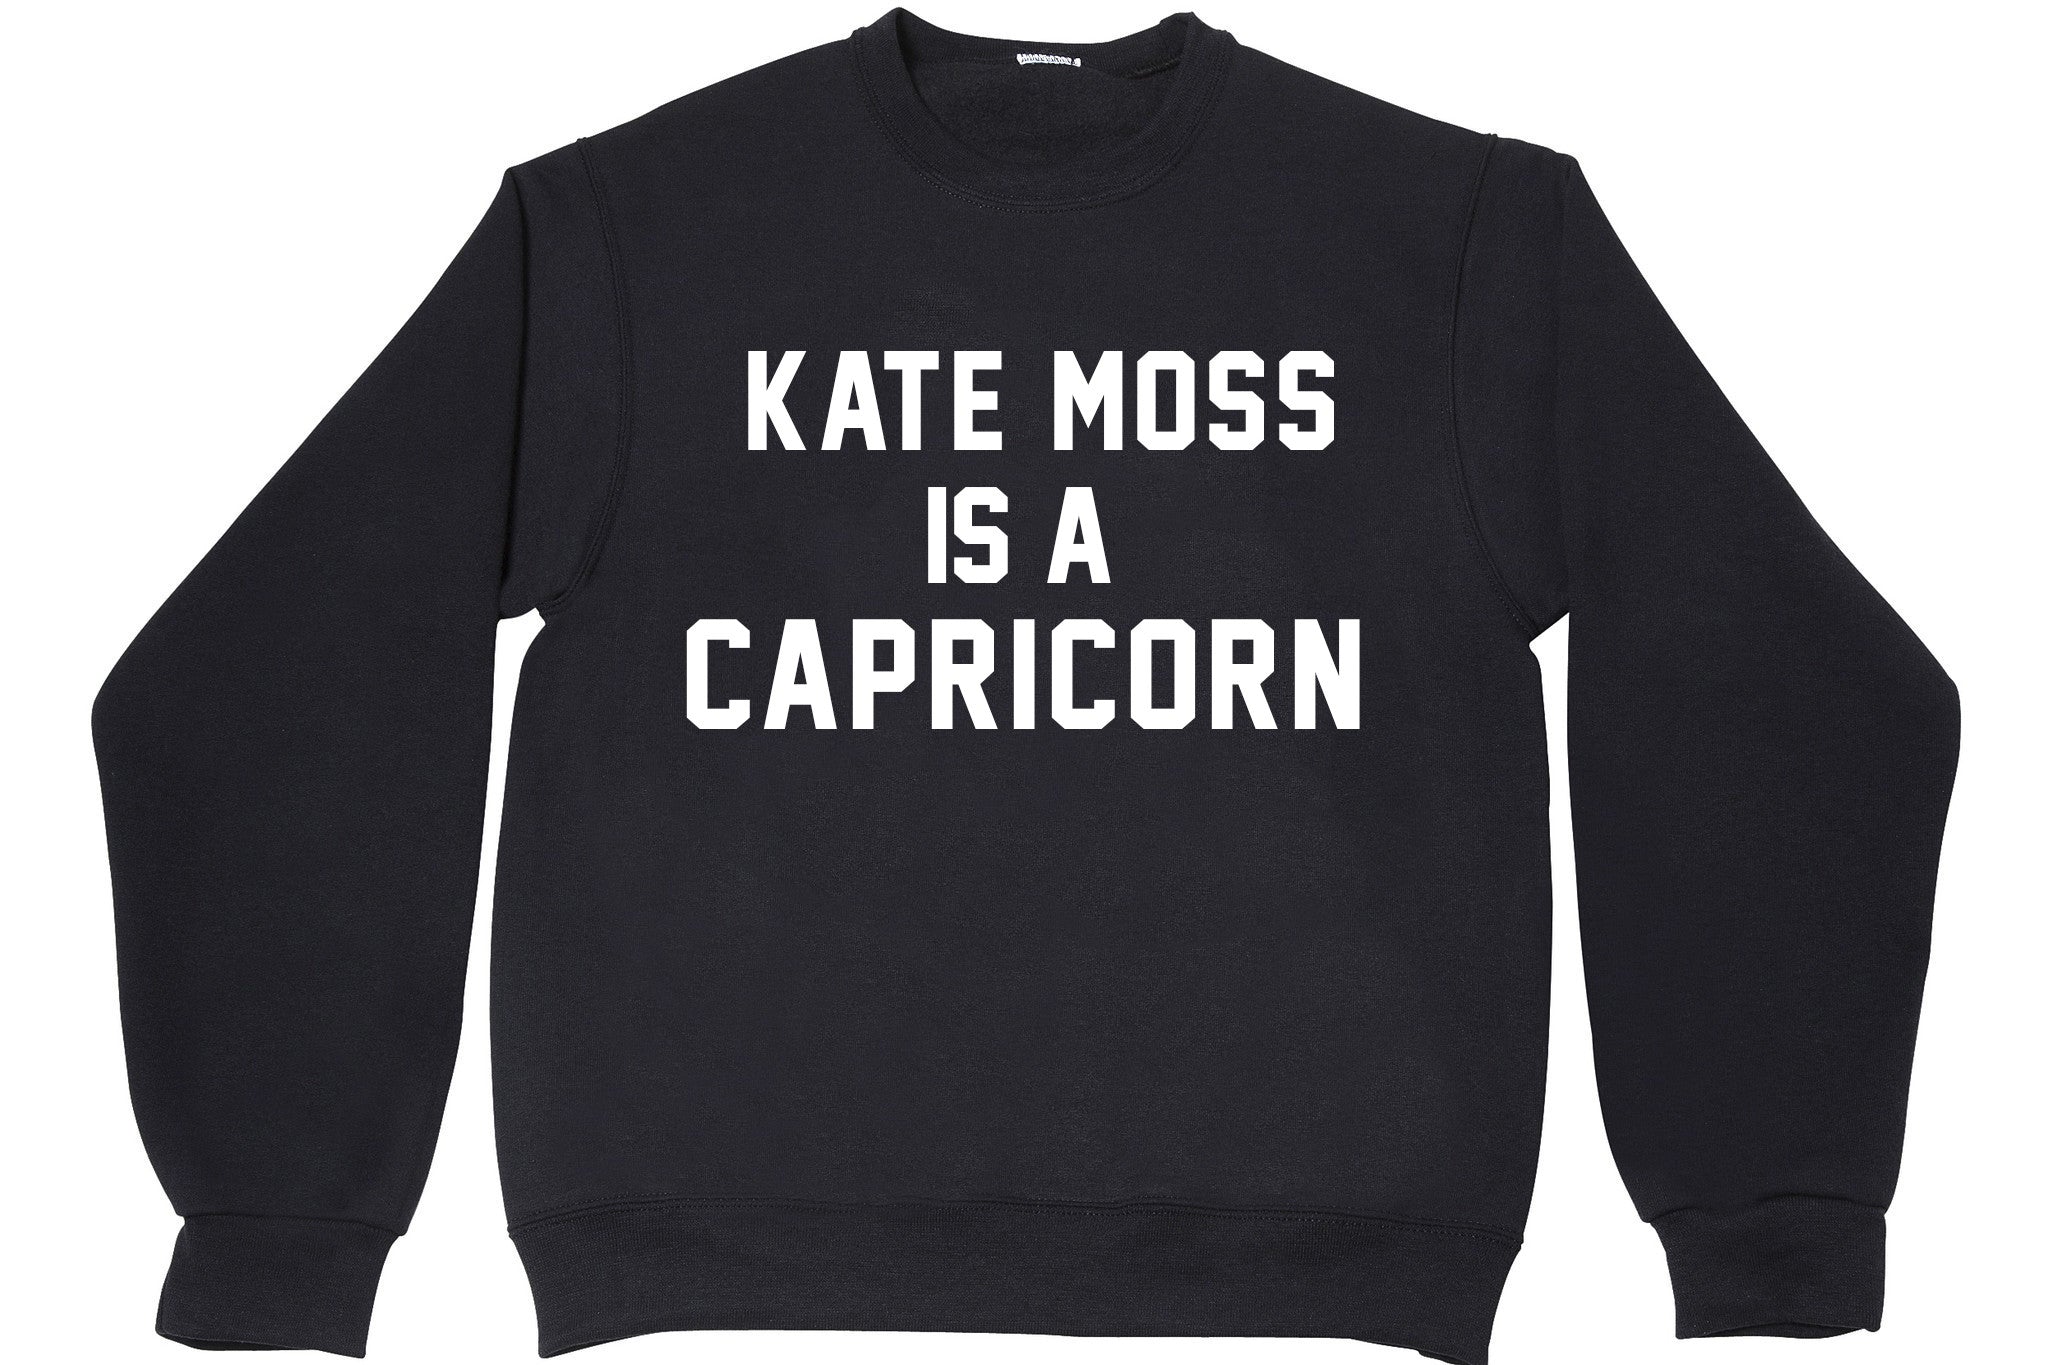 KATE MOSS IS A CAPRICORN